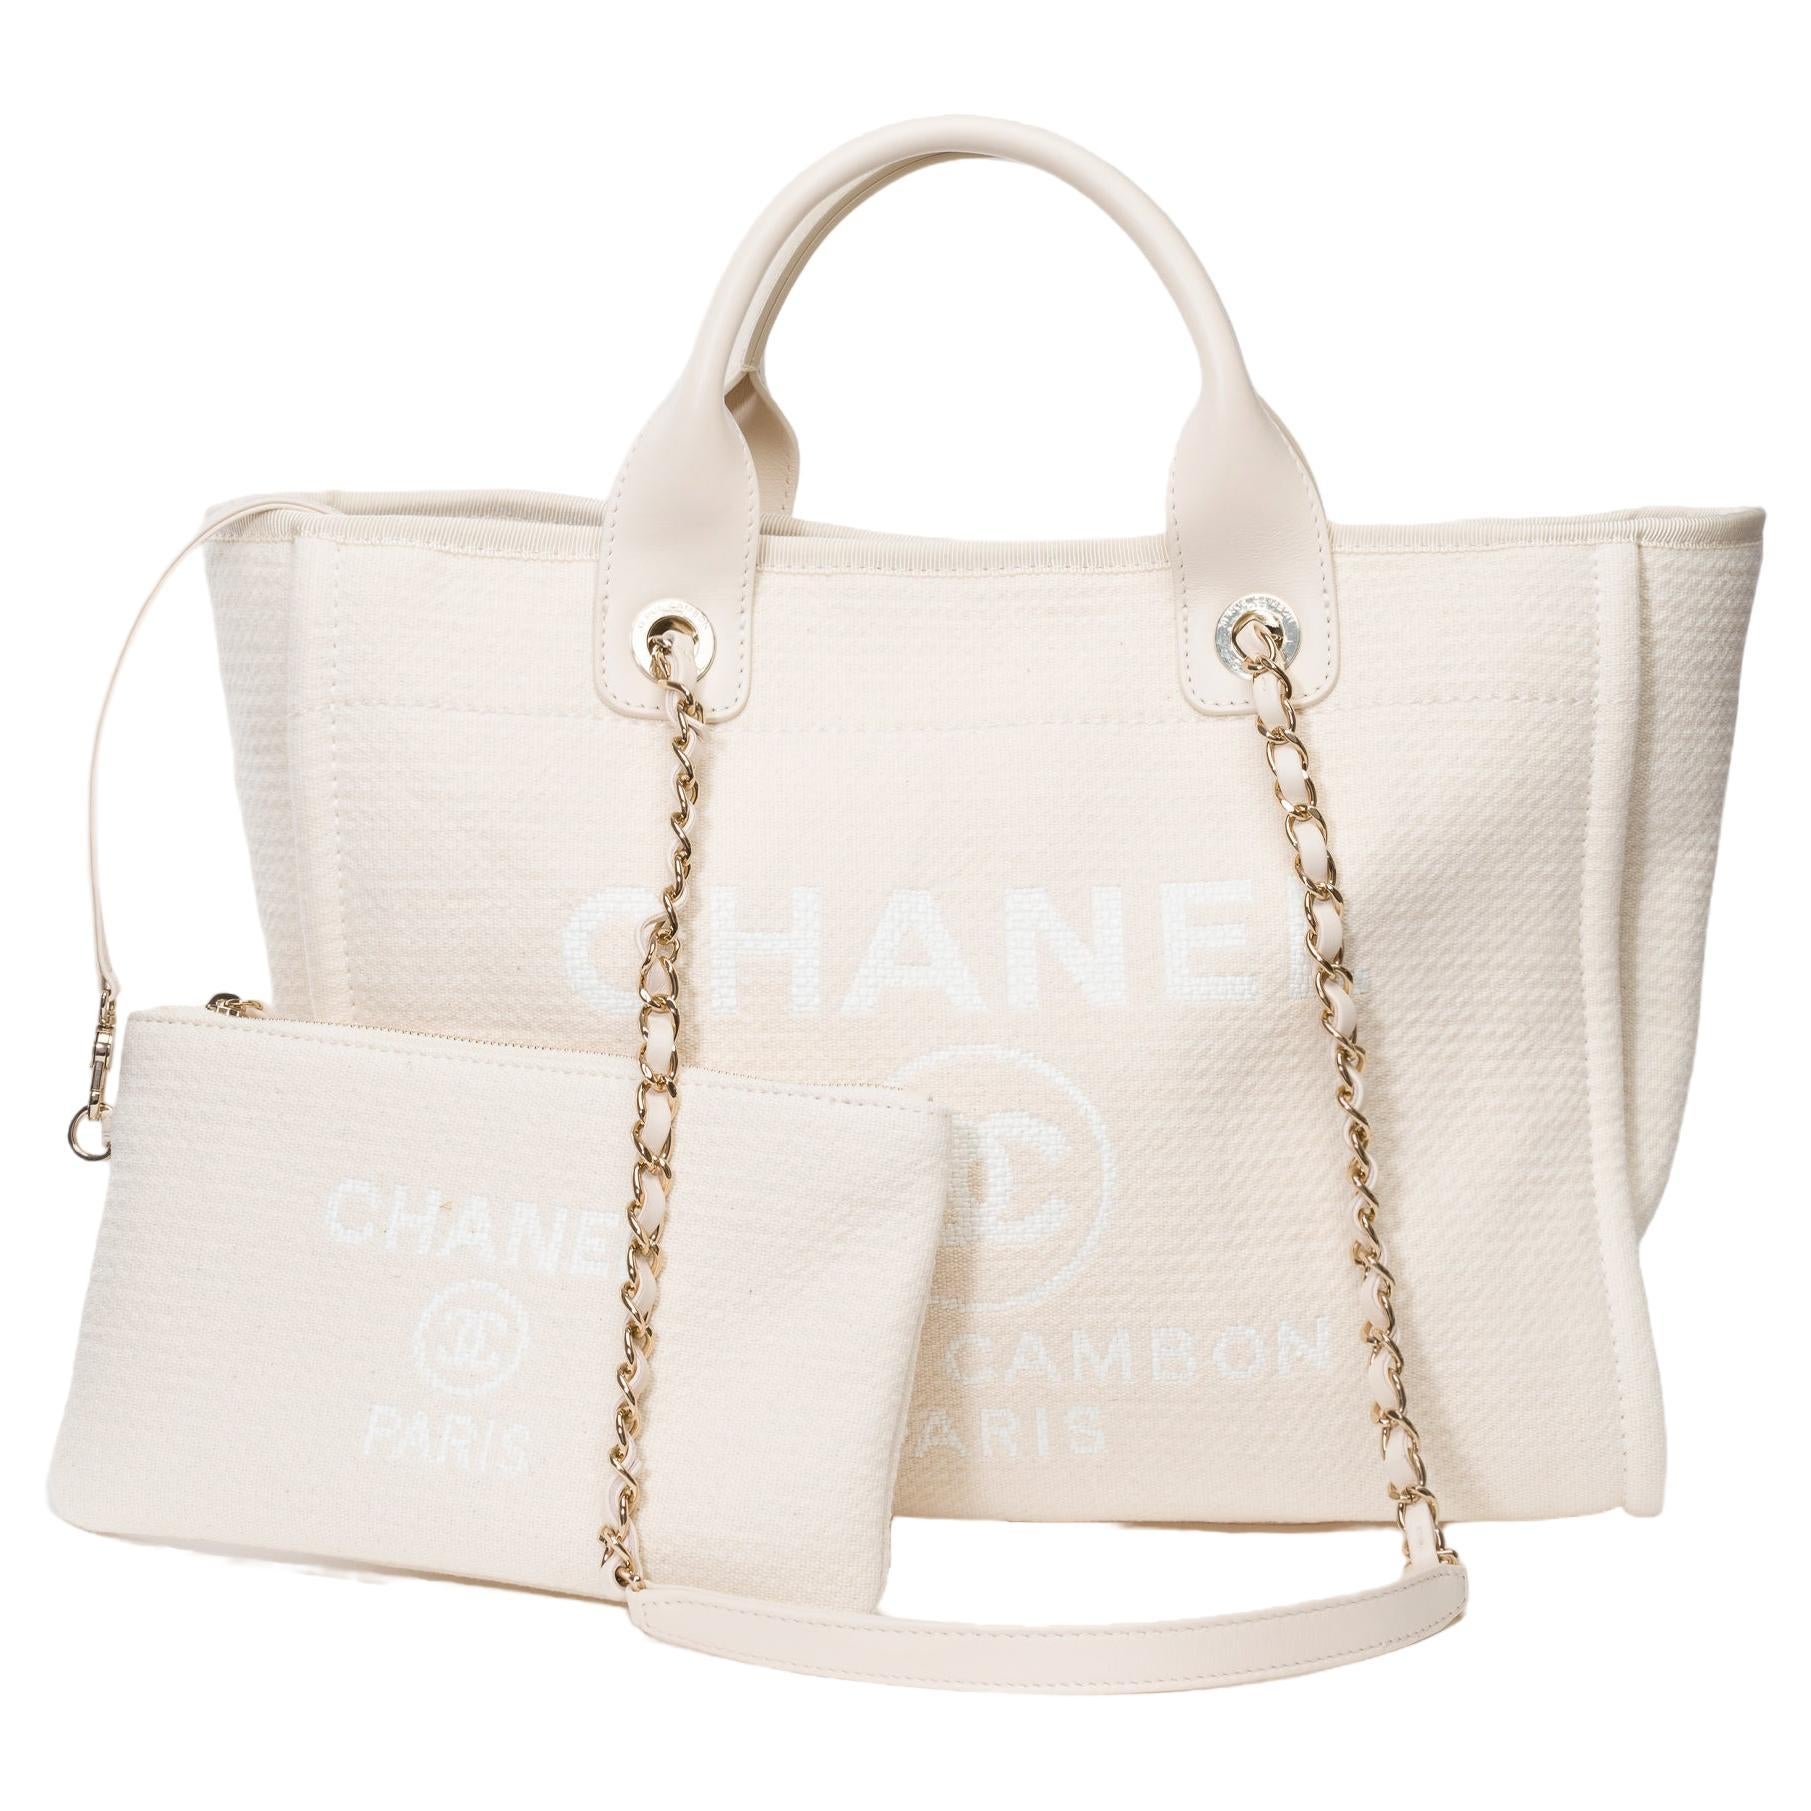 Amazing Chanel Deauville tote bag in off white canvas, SHW For Sale